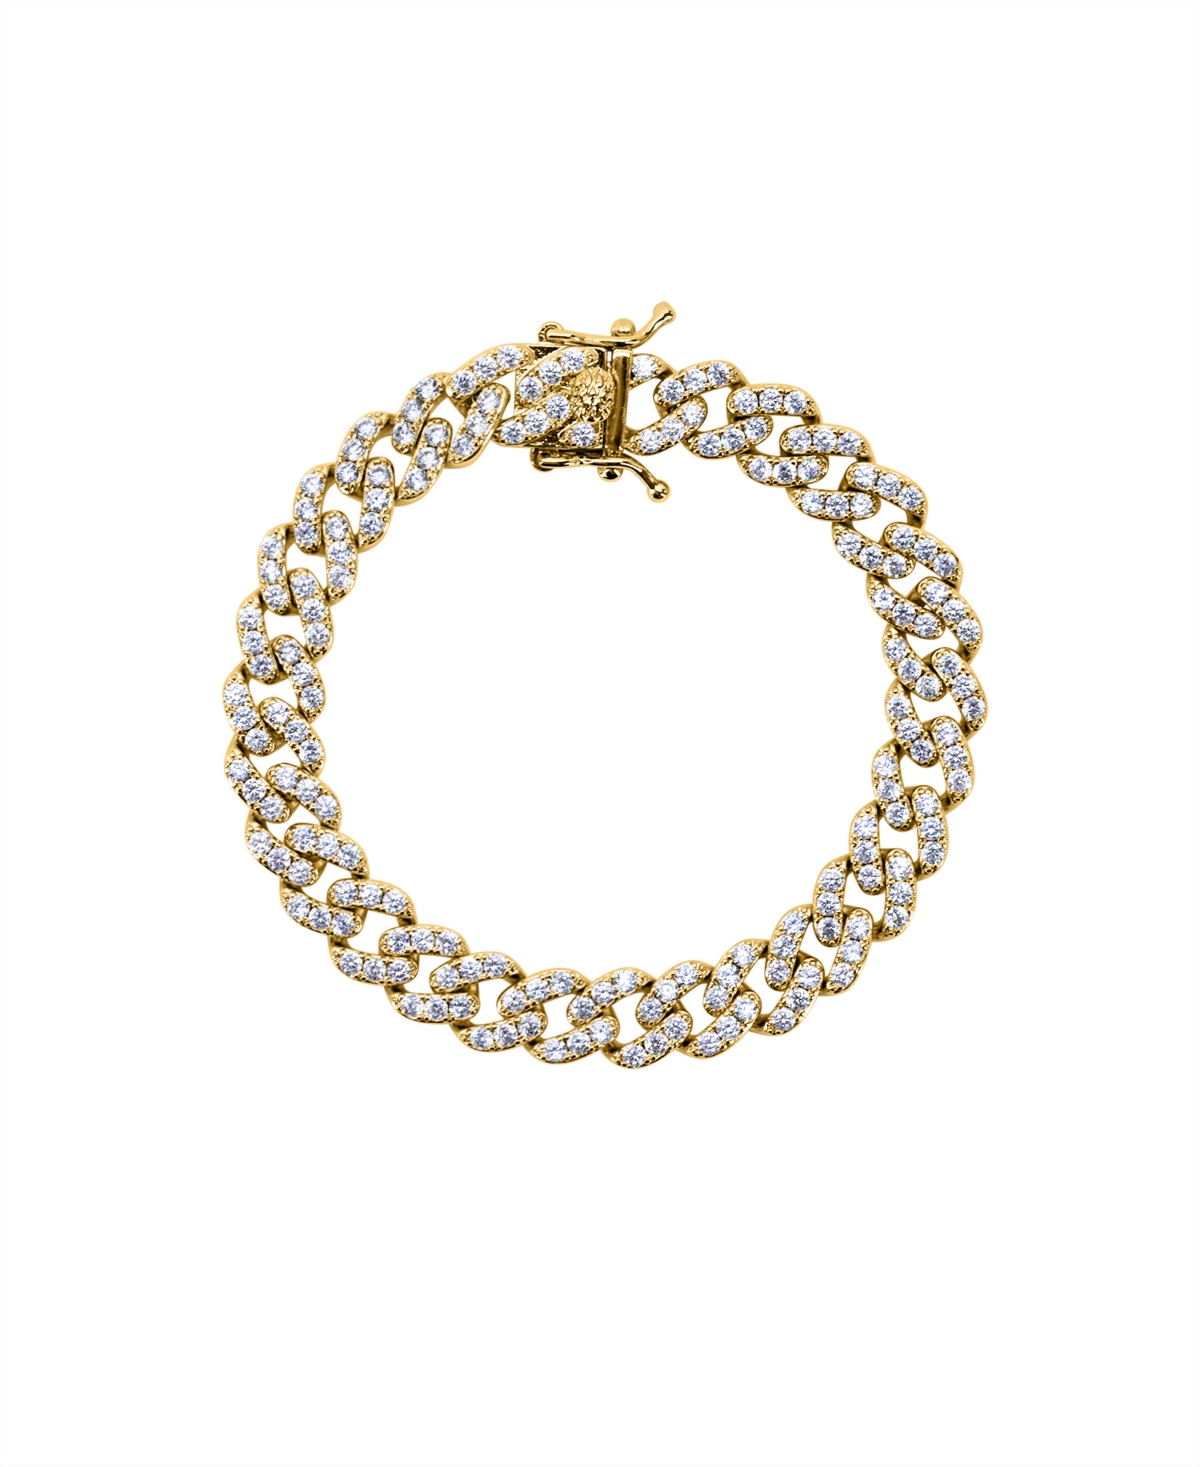 Frosty Link Collection 9mm Bracelet in 18k Gold- Plated Brass, 7" - Gold